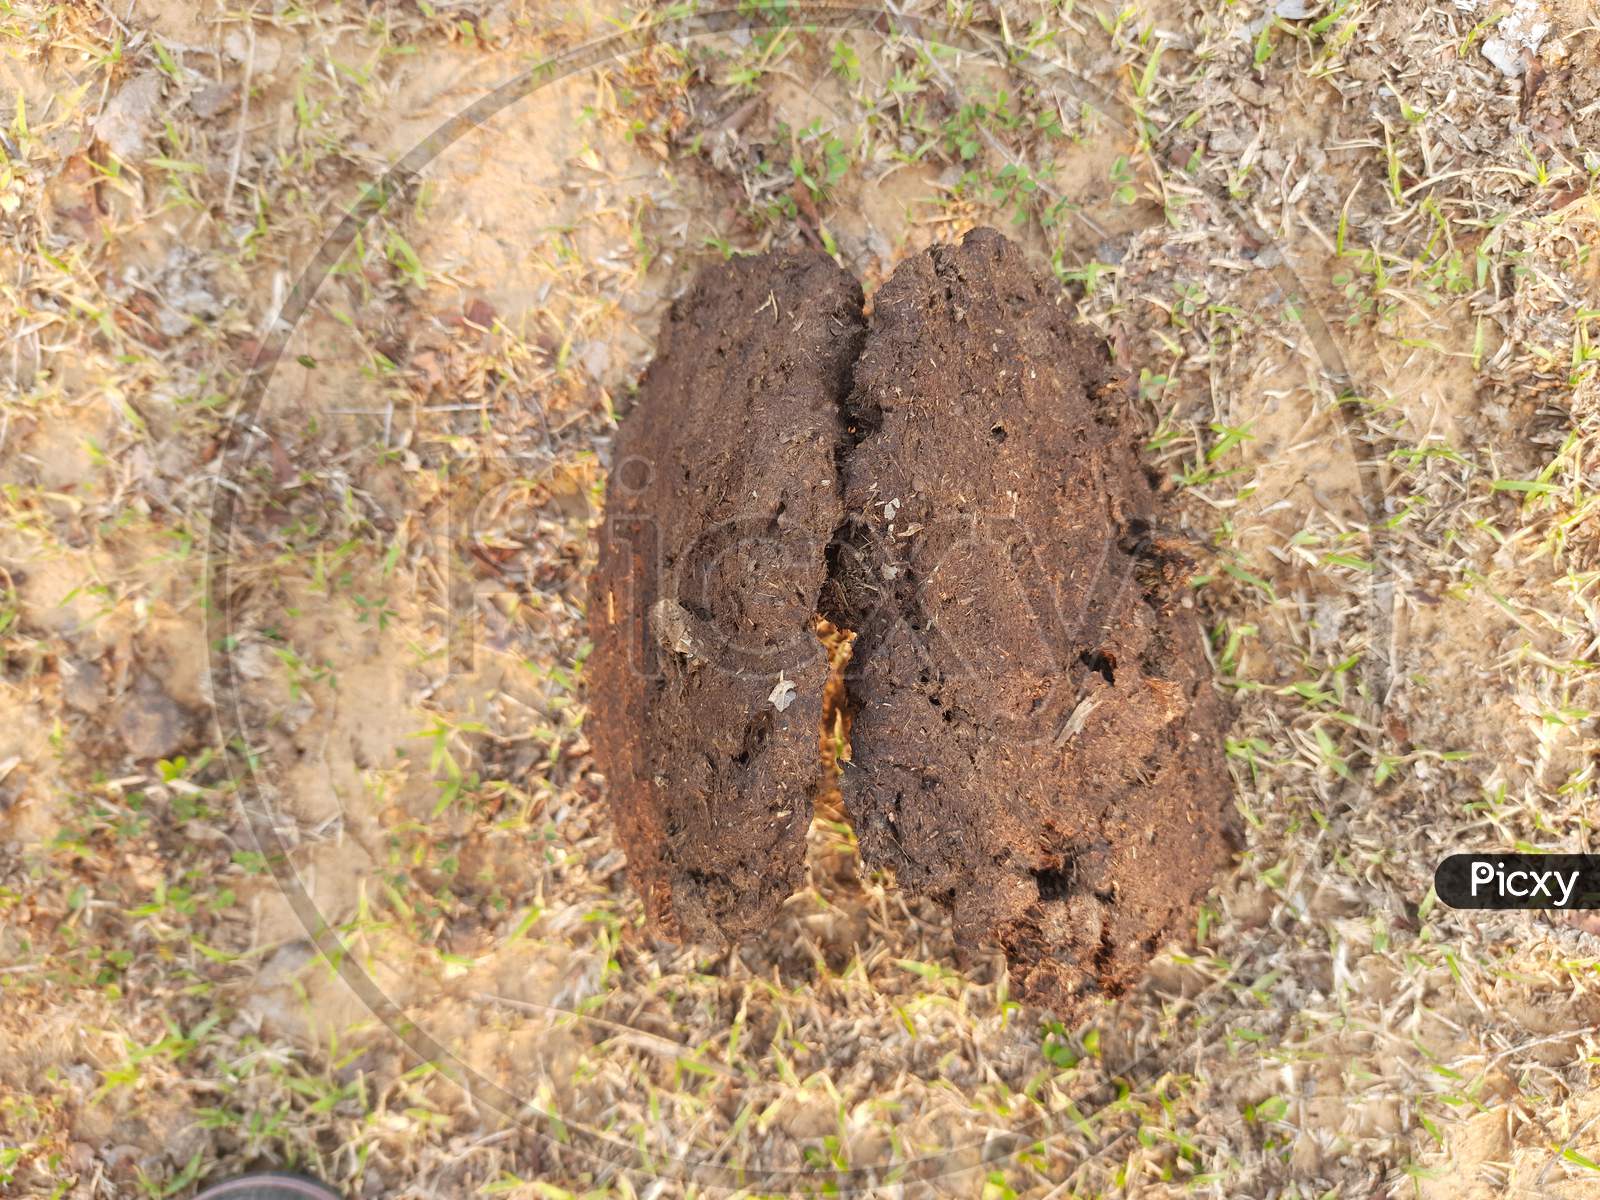 Cow Dung Cakes or gobar upla .